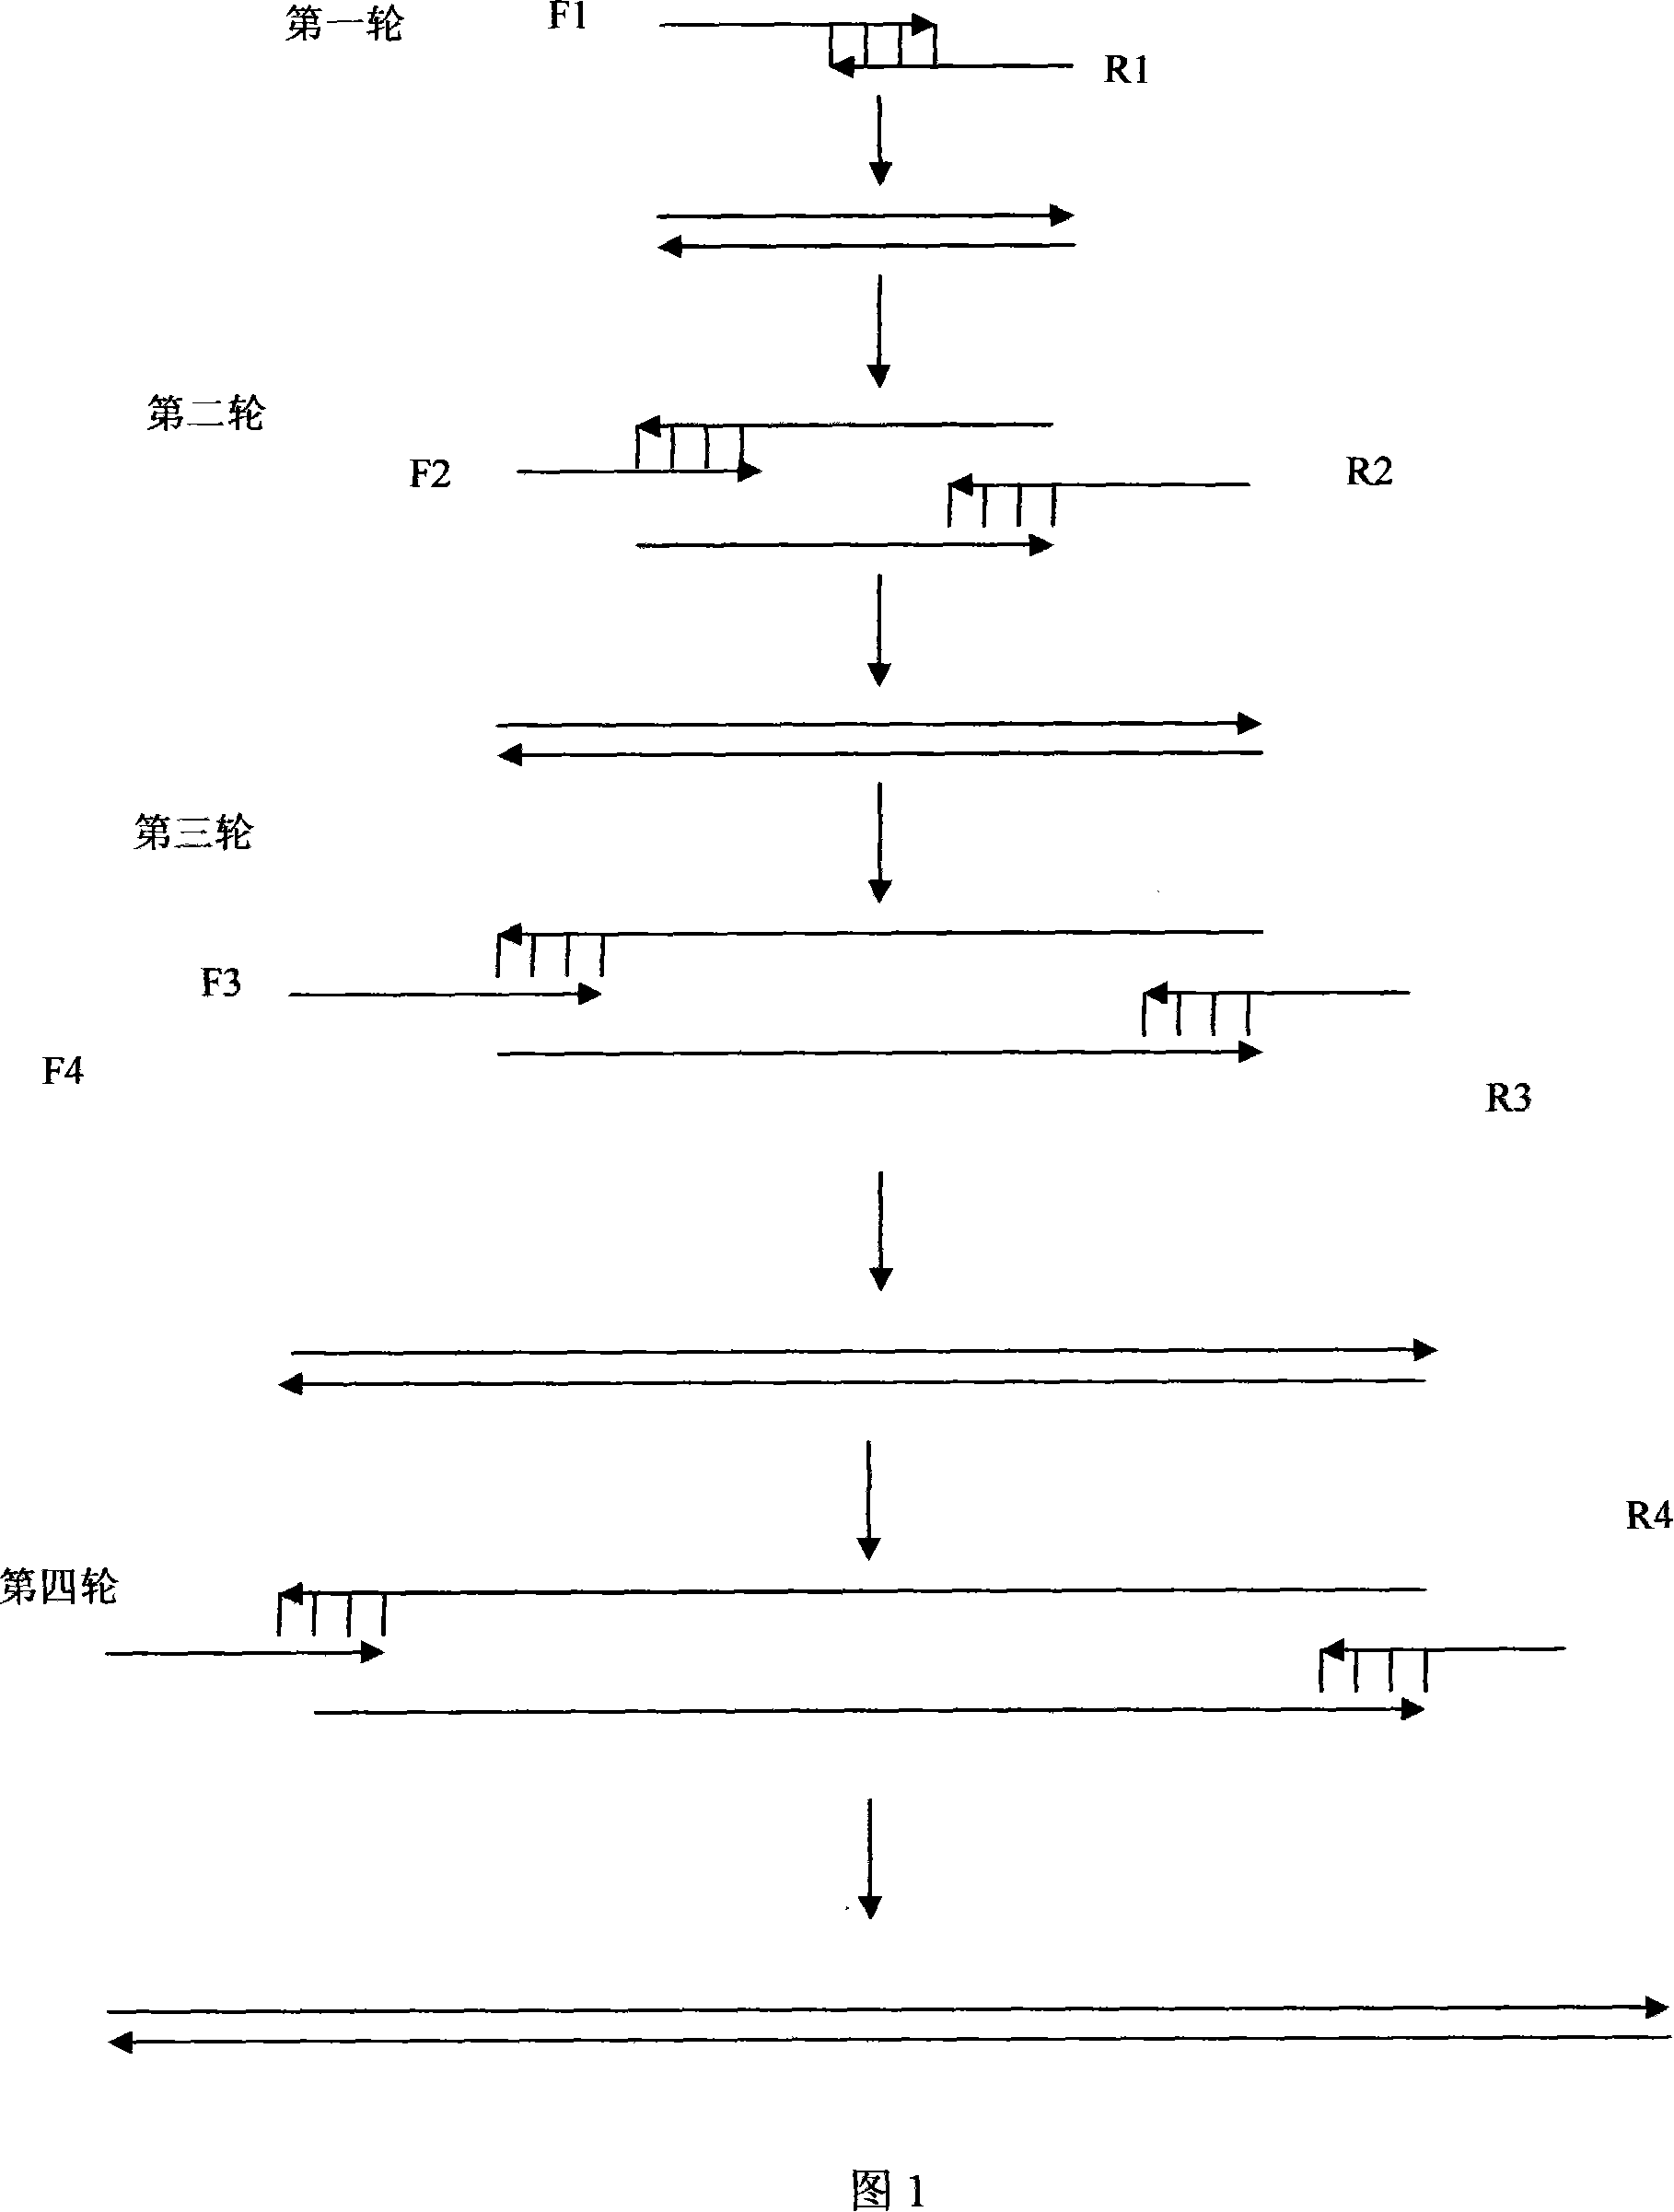 Recombinant soluble human FGFR2 extracellular fragment and production method and application thereof